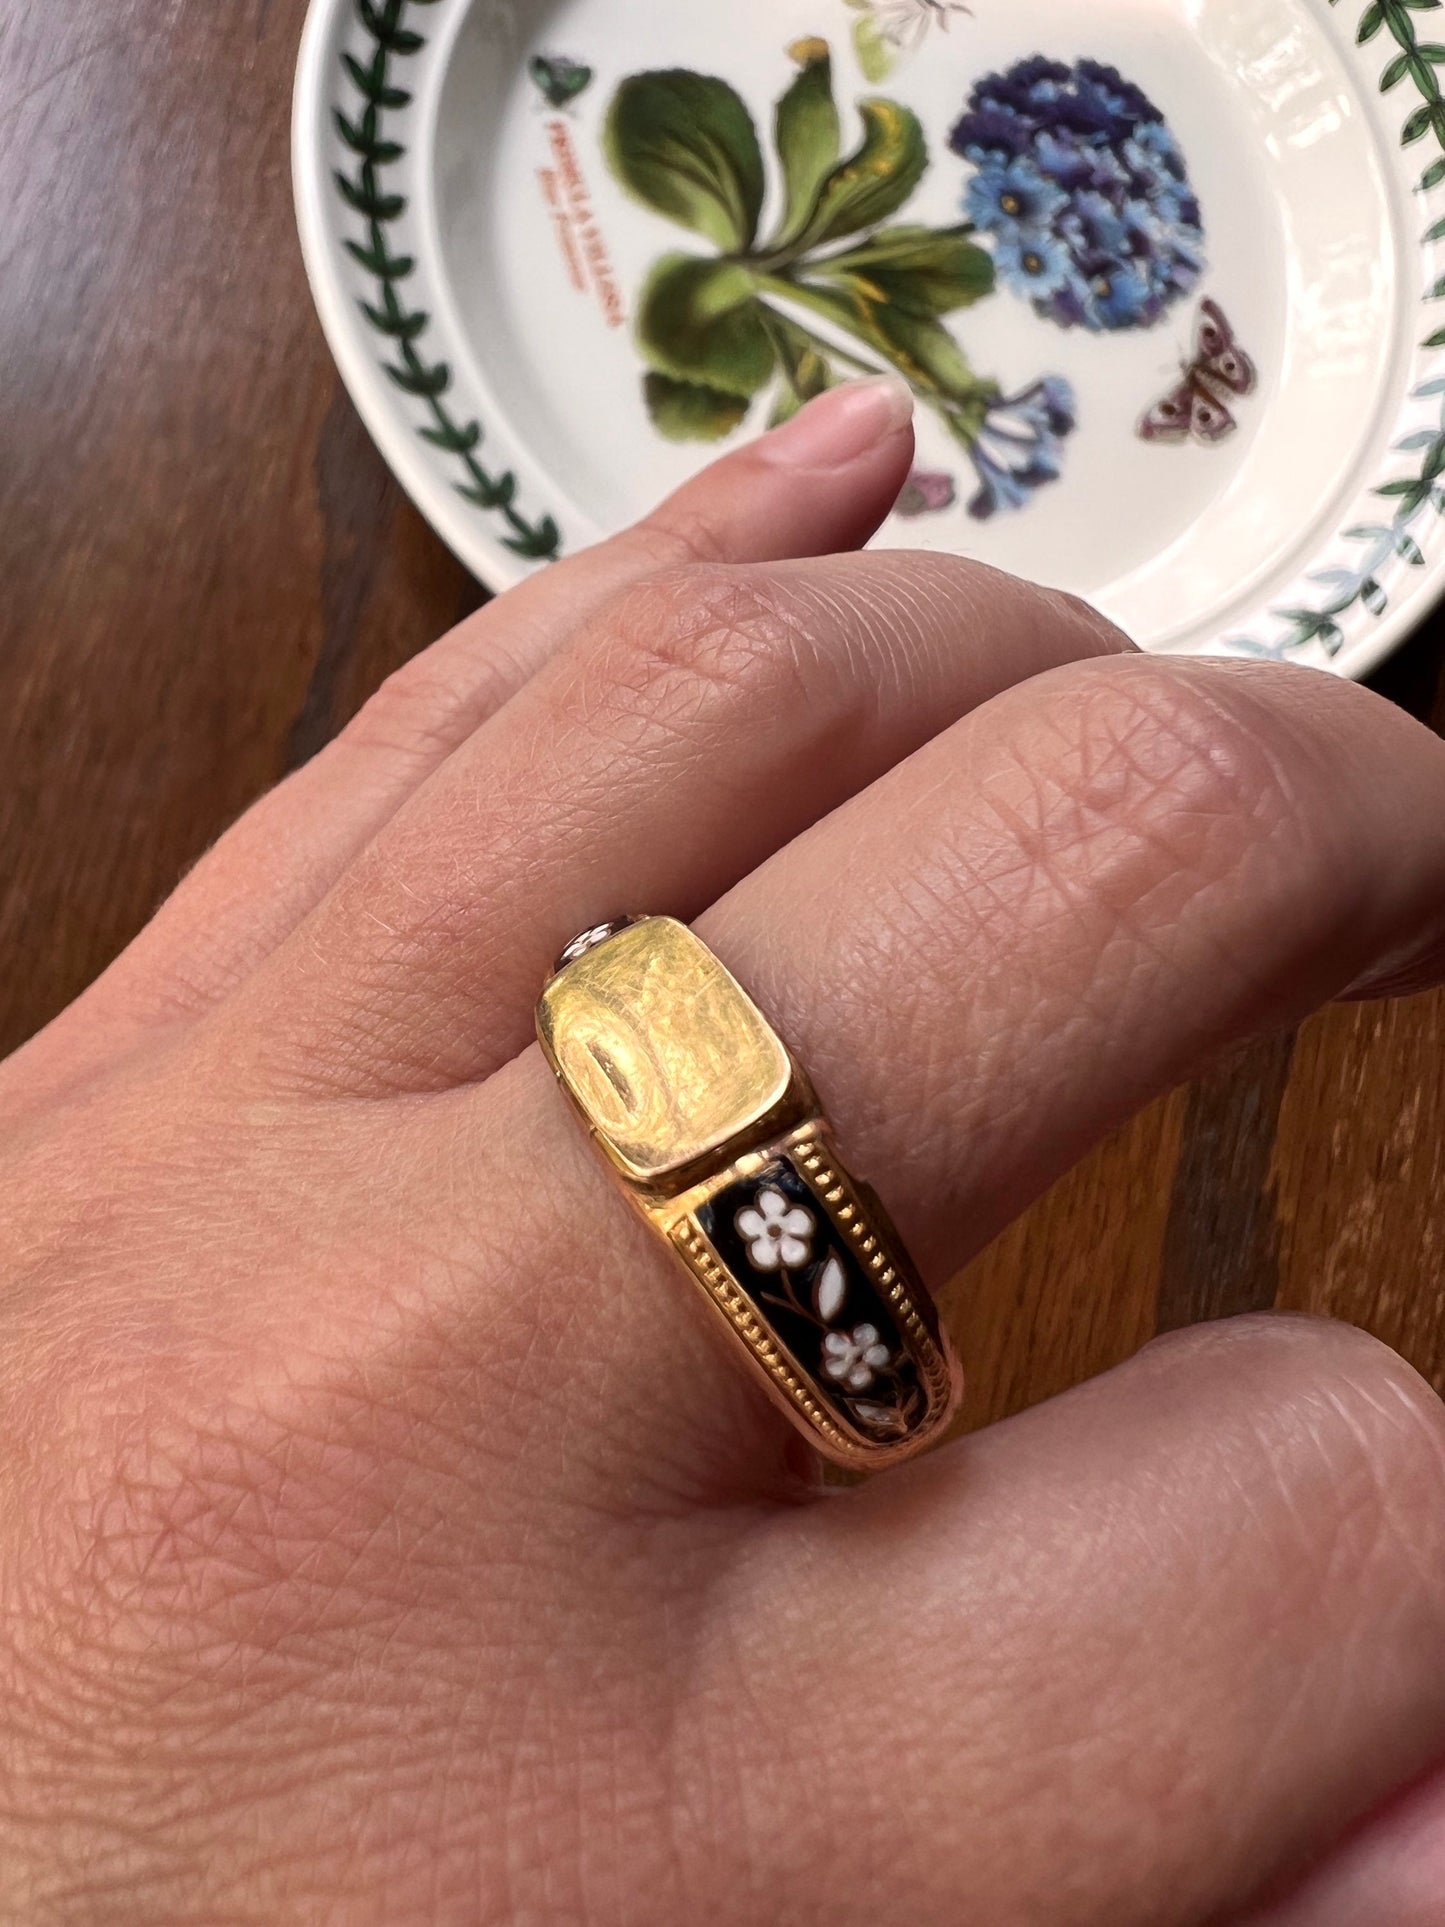 RARE French LOCKET Ring ViCTORIAN Antique POISON 18k Gold Black Enamel Floral Box Signet Wide Band Romantic Gift OOaK Mourning Forget Me Not